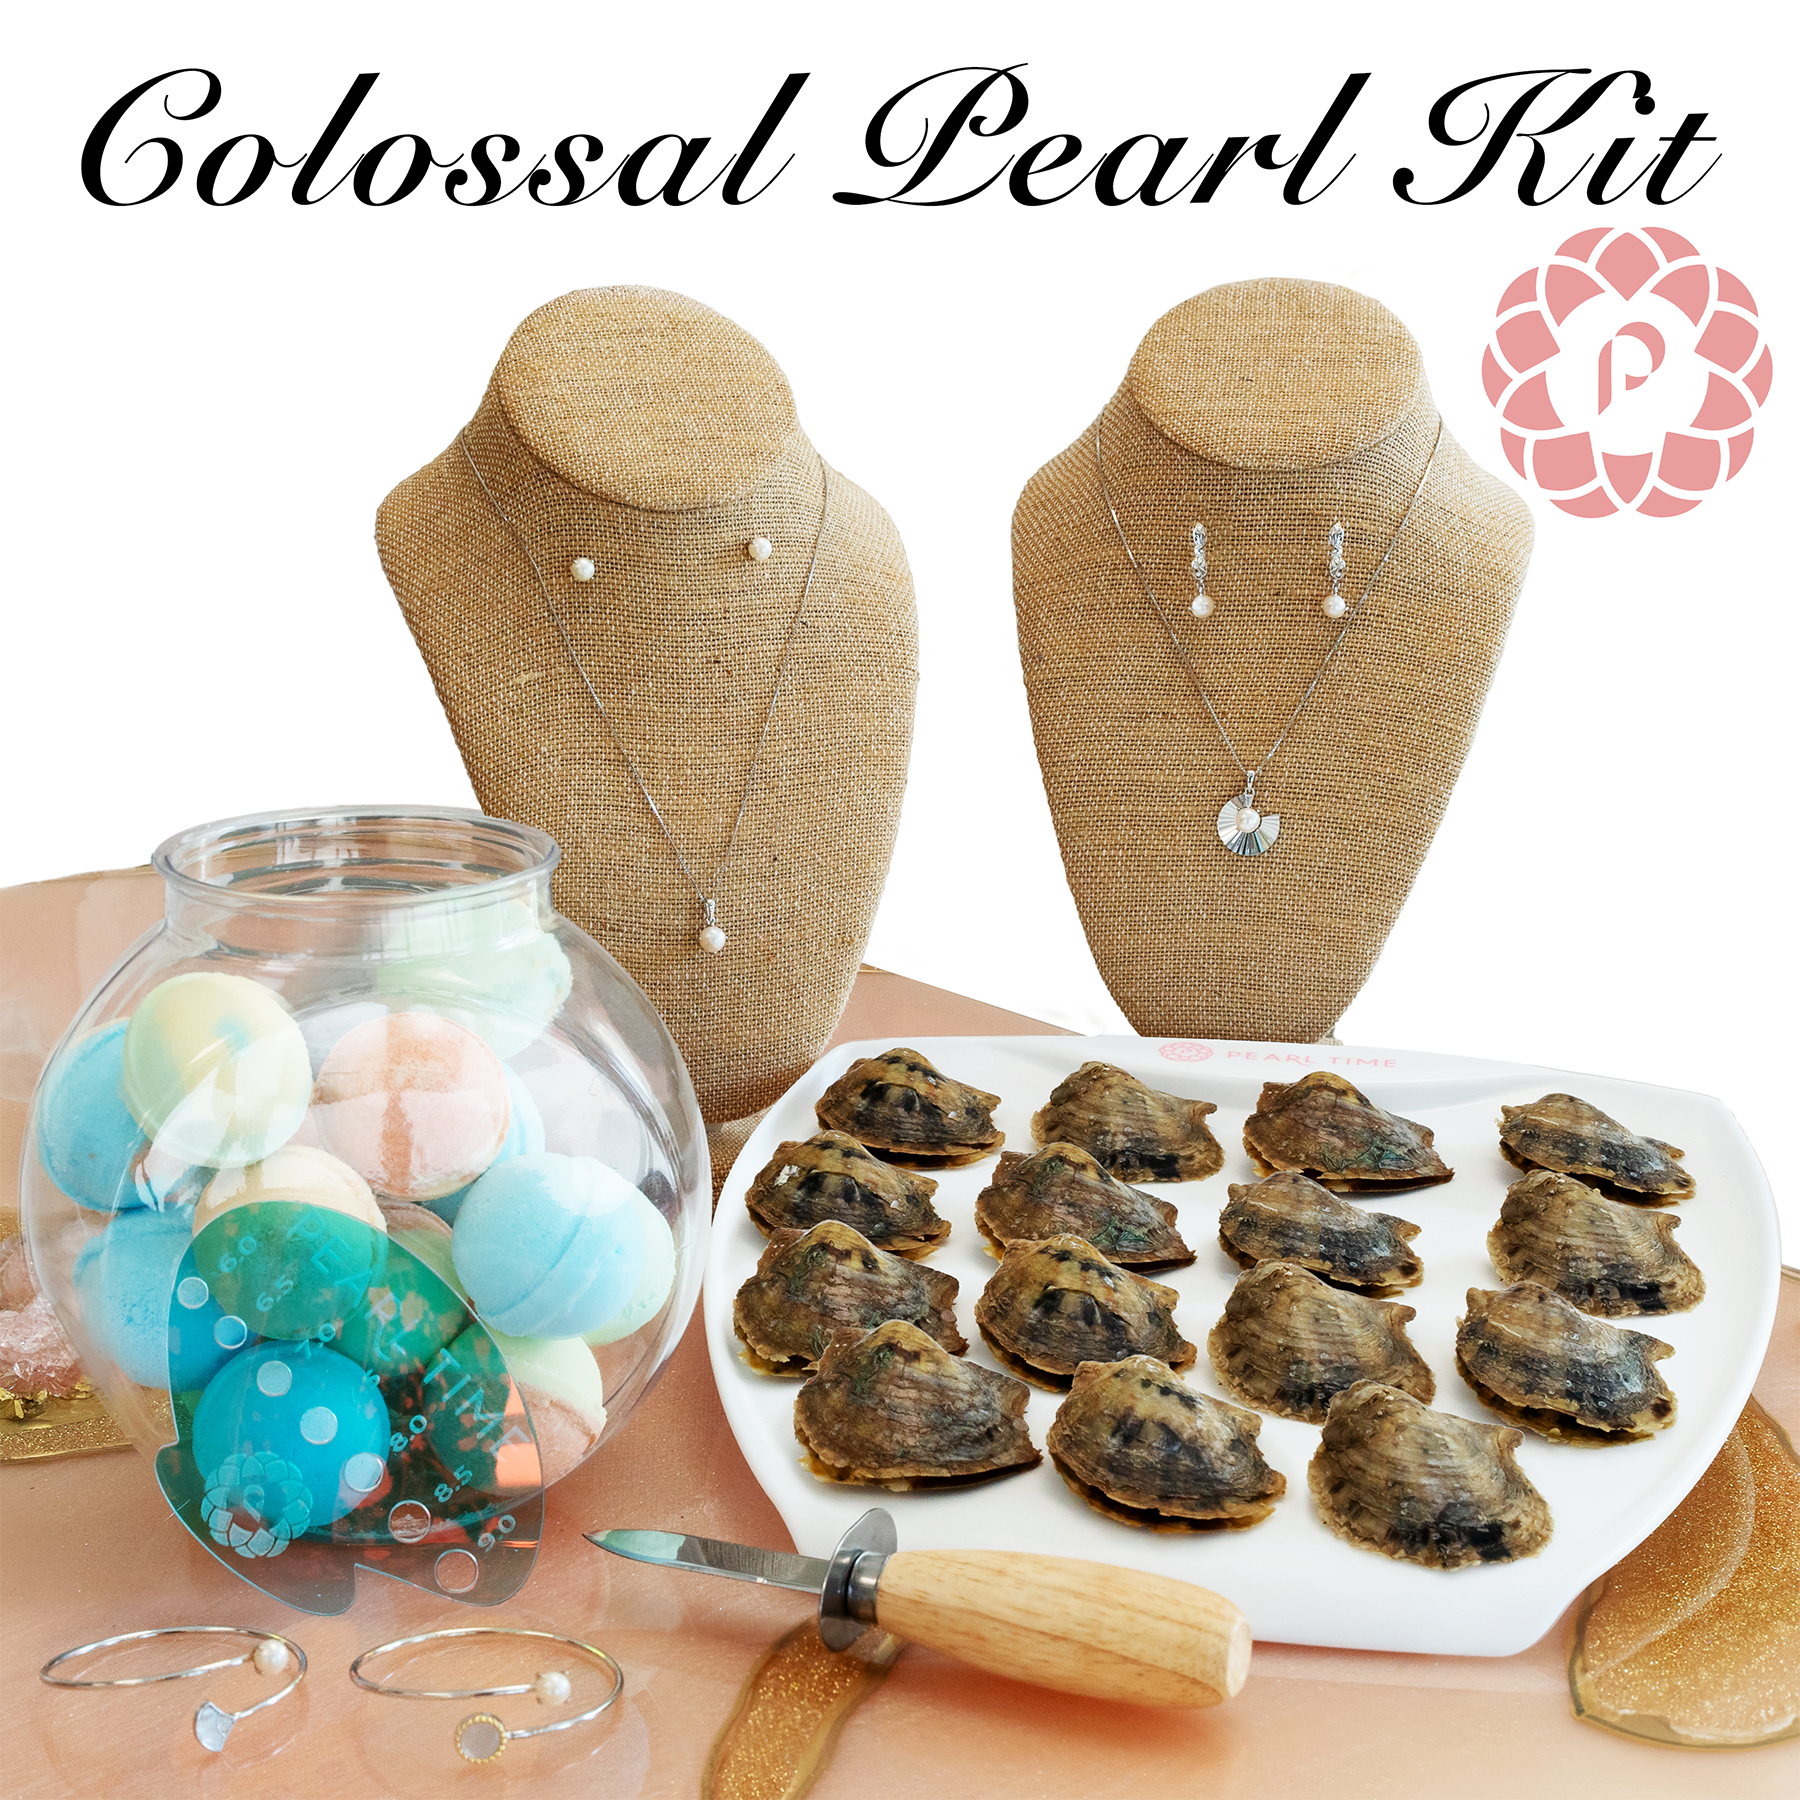 Colossal Pearl kit